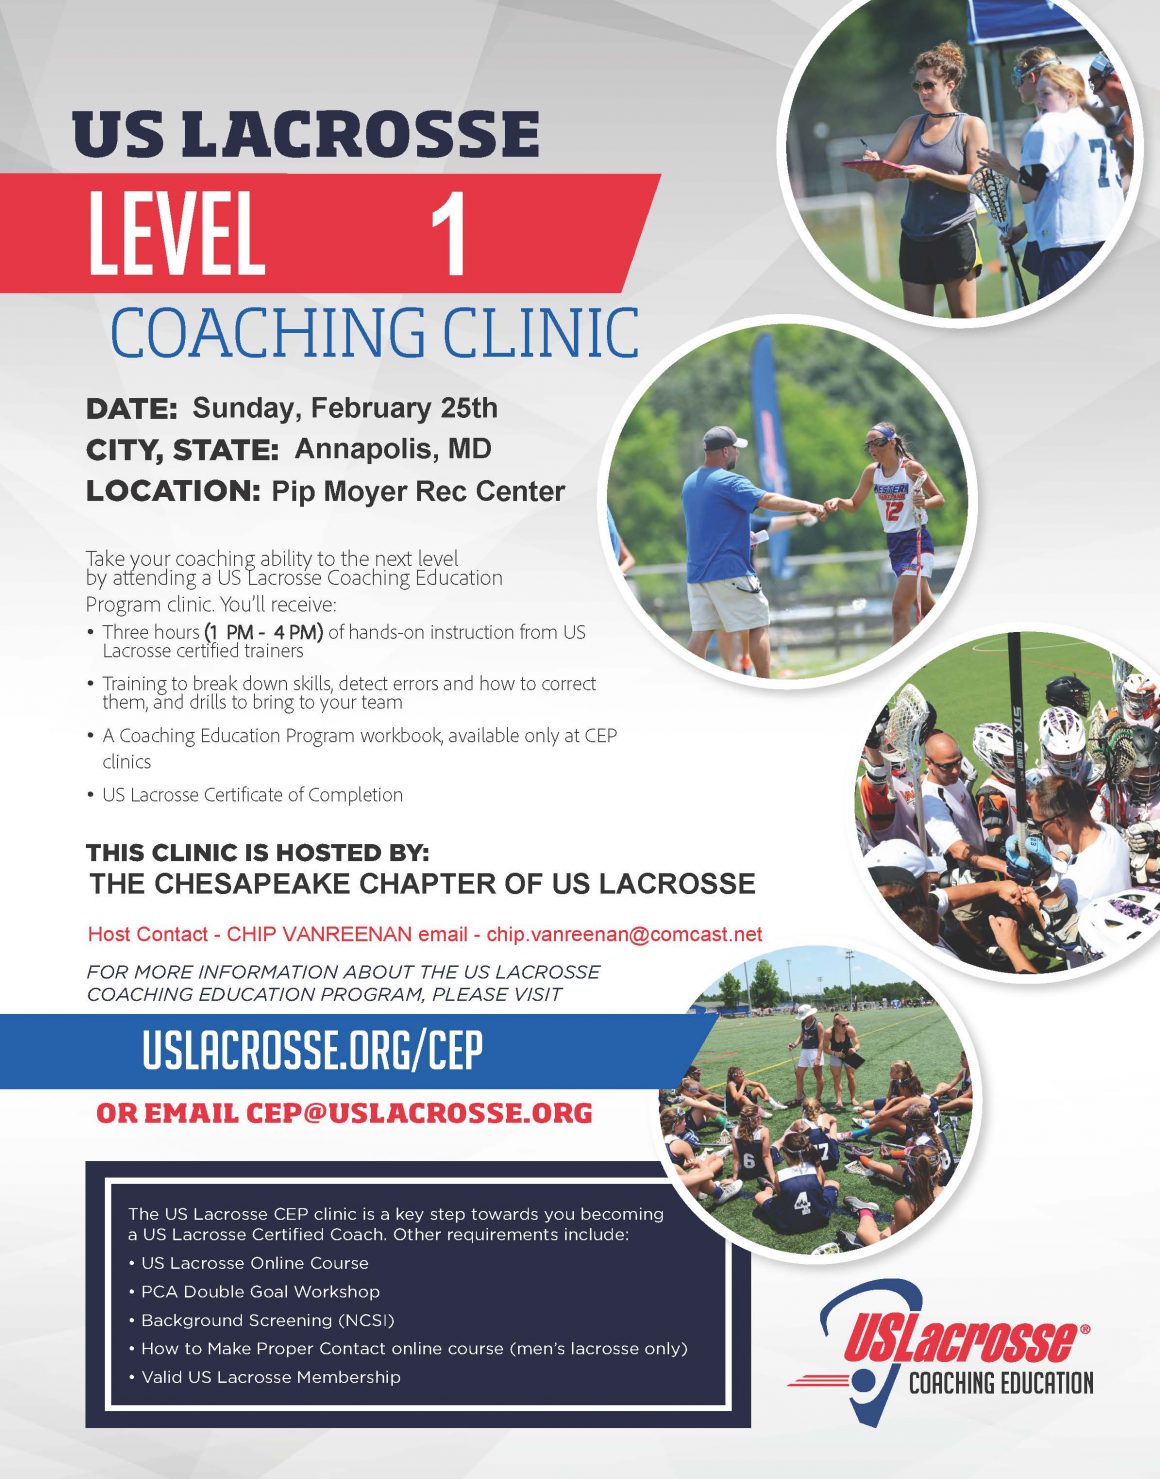 Upcoming US Lacrosse Coaching Clinic Coaching Clinic- Sunday February 25th in Annapolis Maryland!